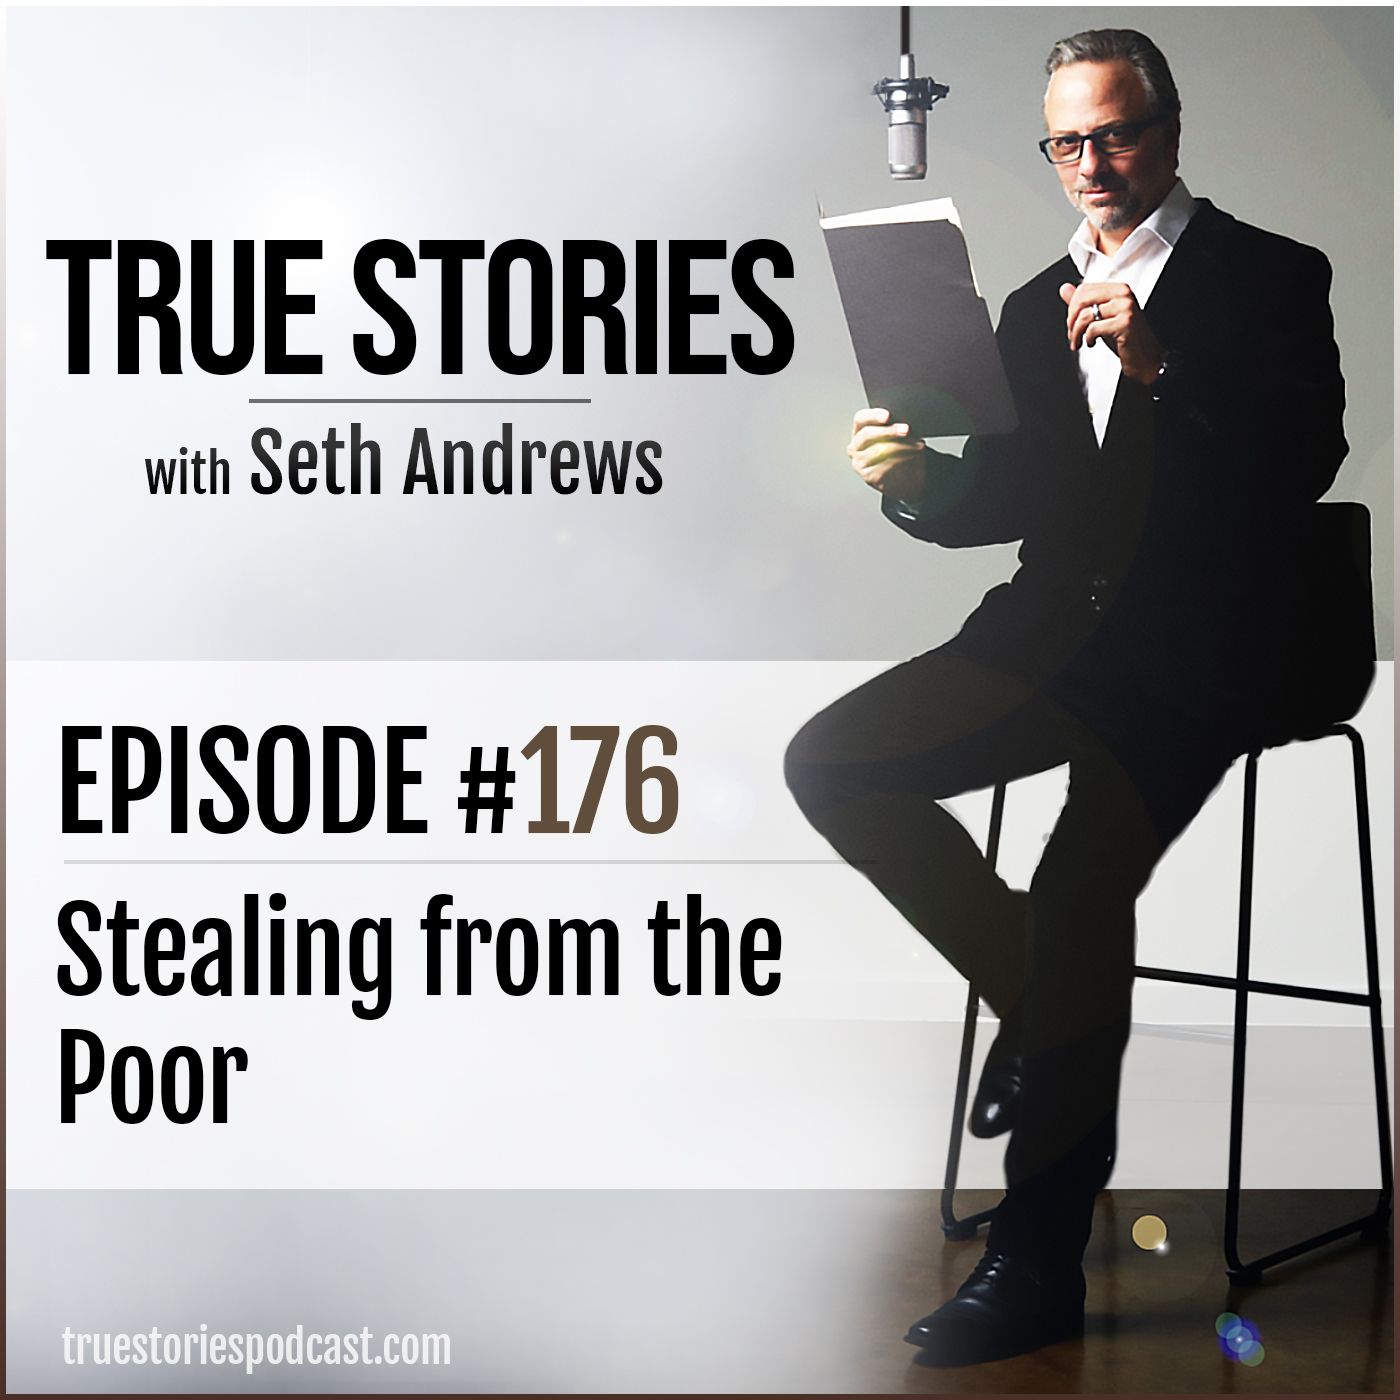 True Stories #176 - Stealing from the Poor